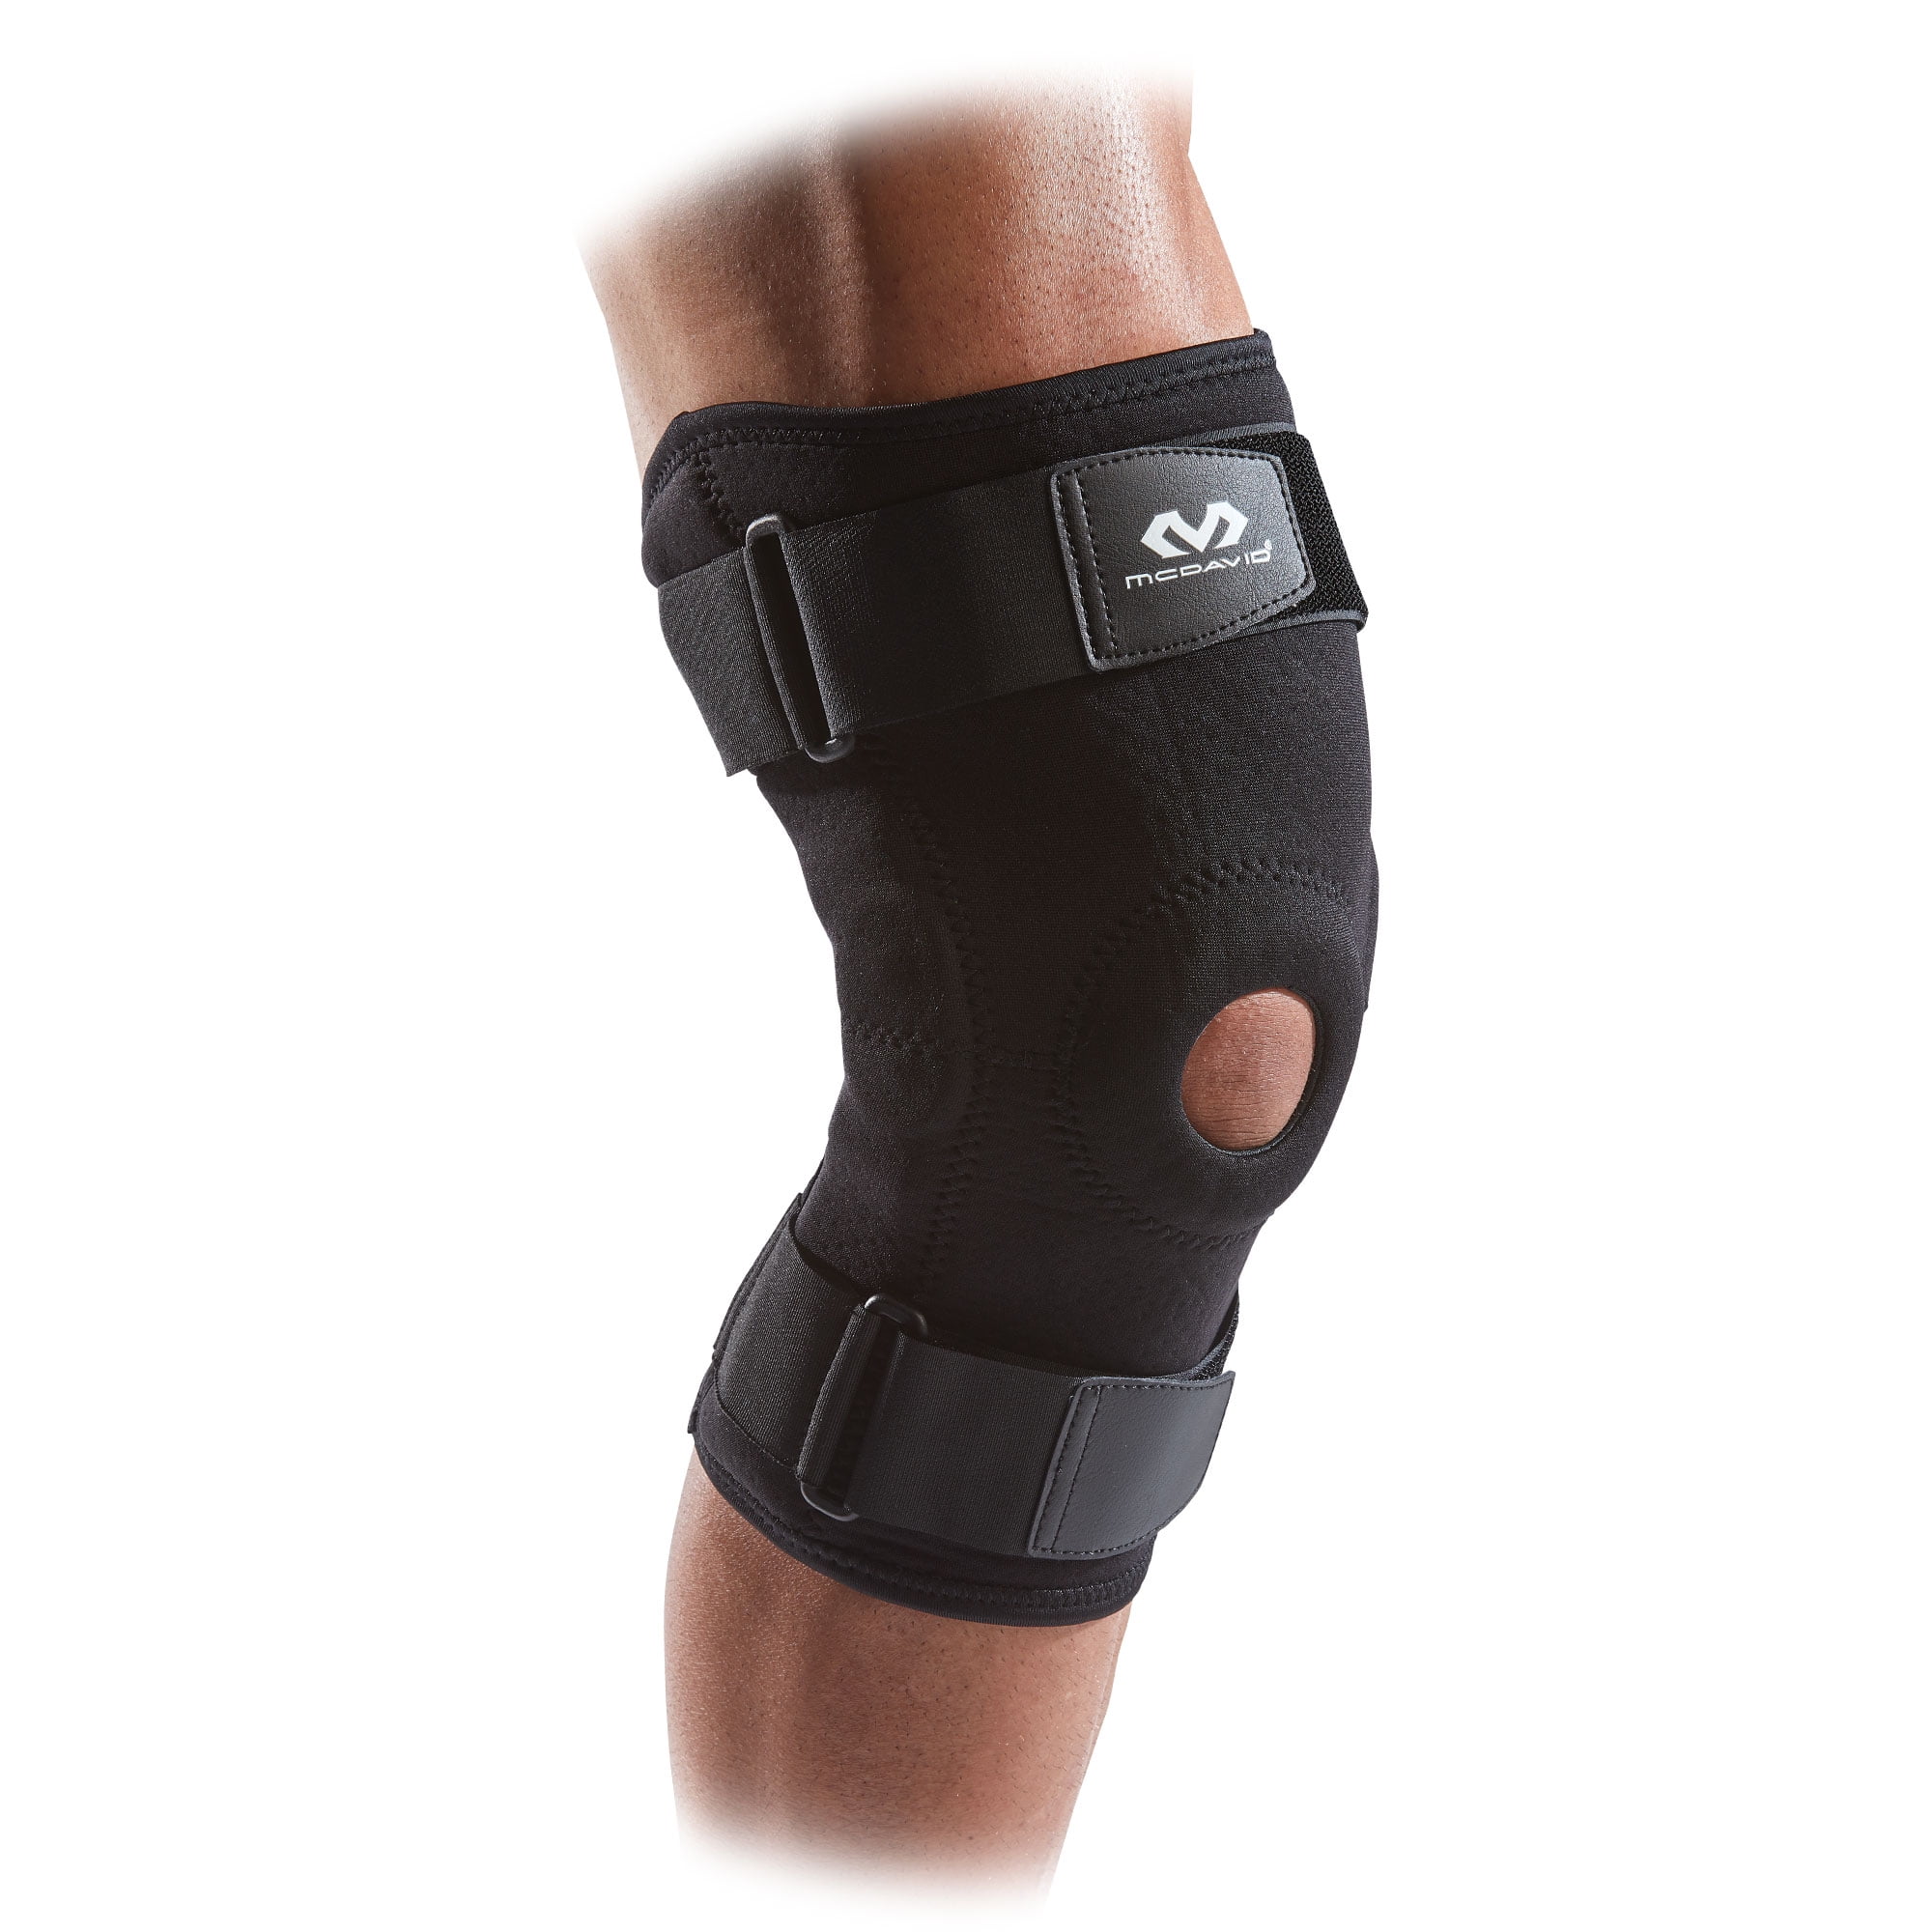 McDavid Knee Brace W/ Dual Hinge Support for Support and Relief,  Small/Medium 